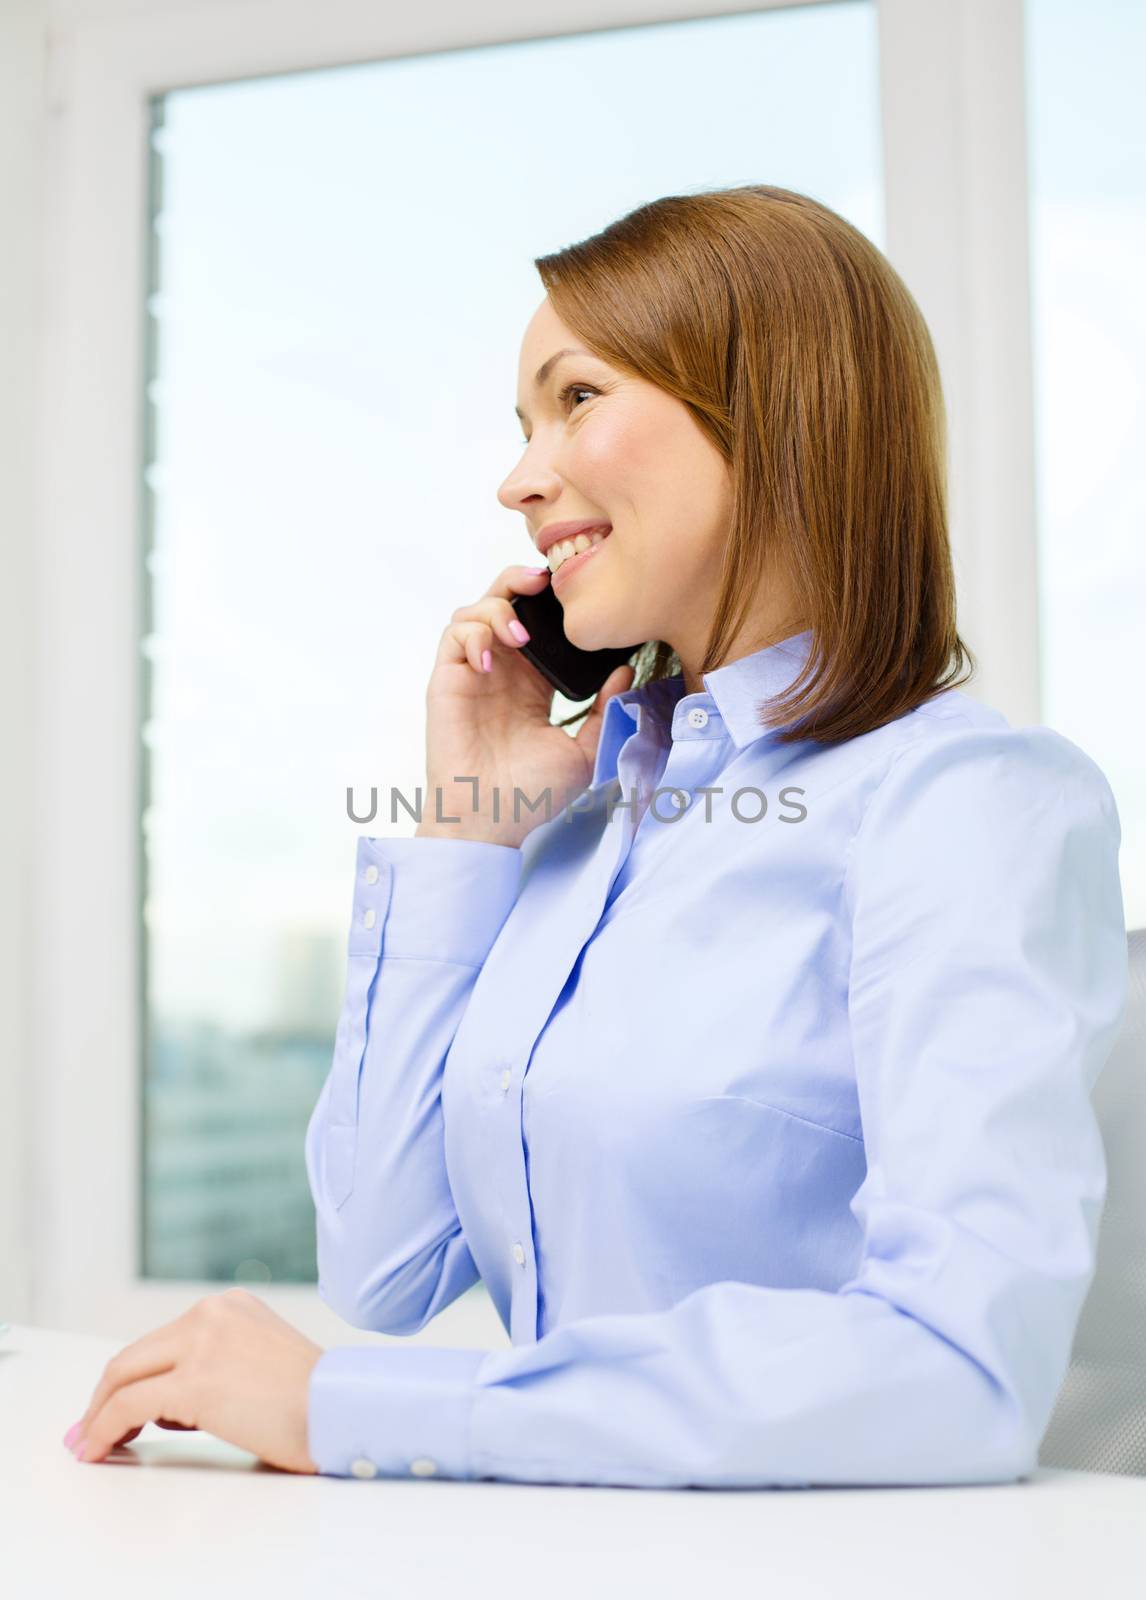 african businesswoman with smartphone in office by dolgachov